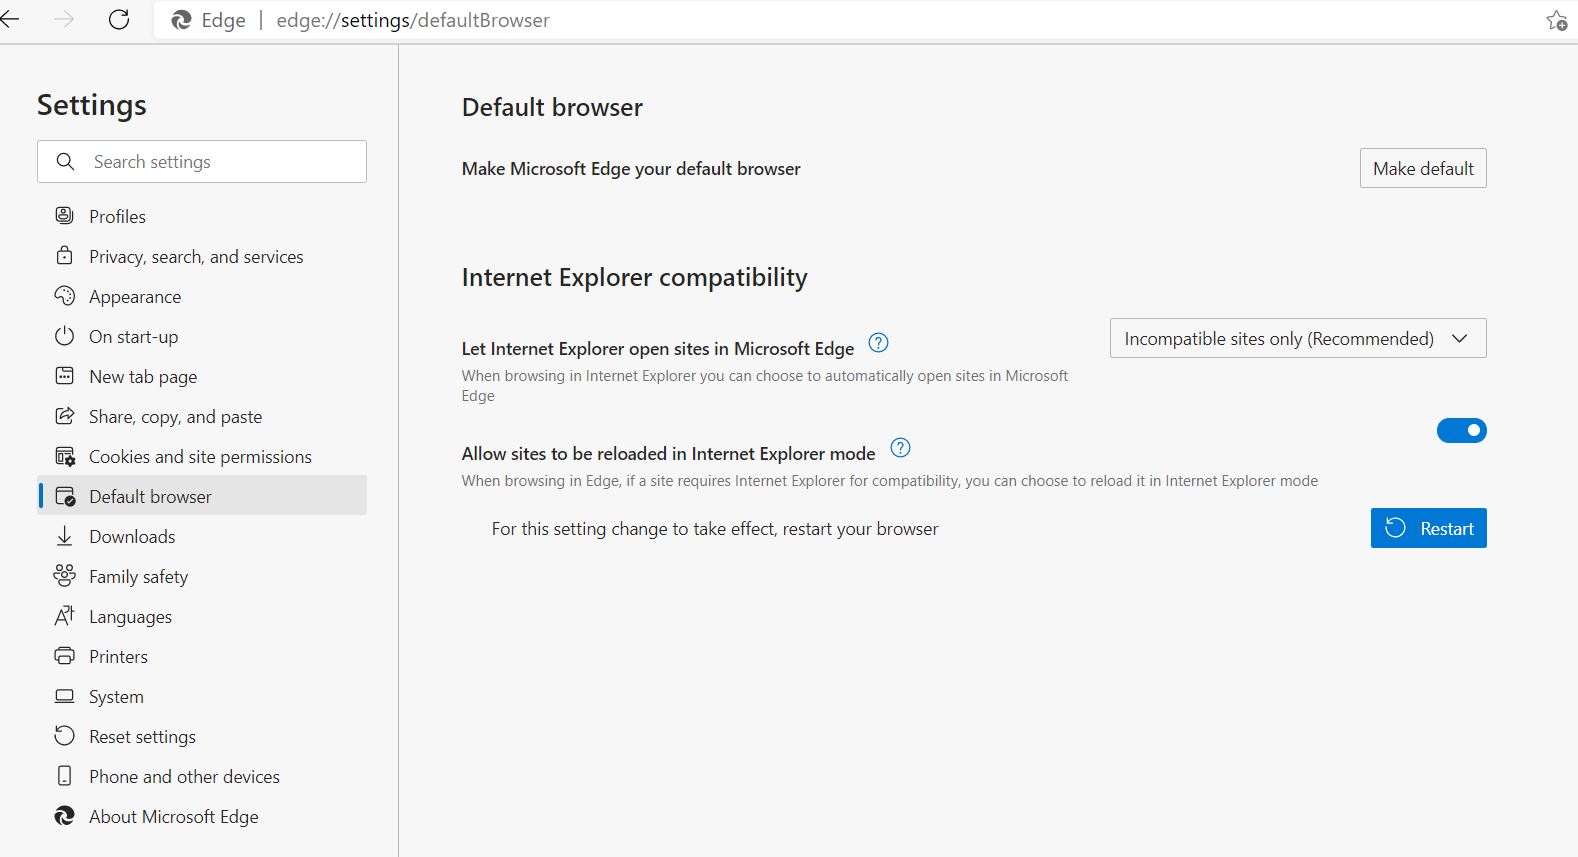 How to change default settings from Microsoft Edge to Internet Explorer?